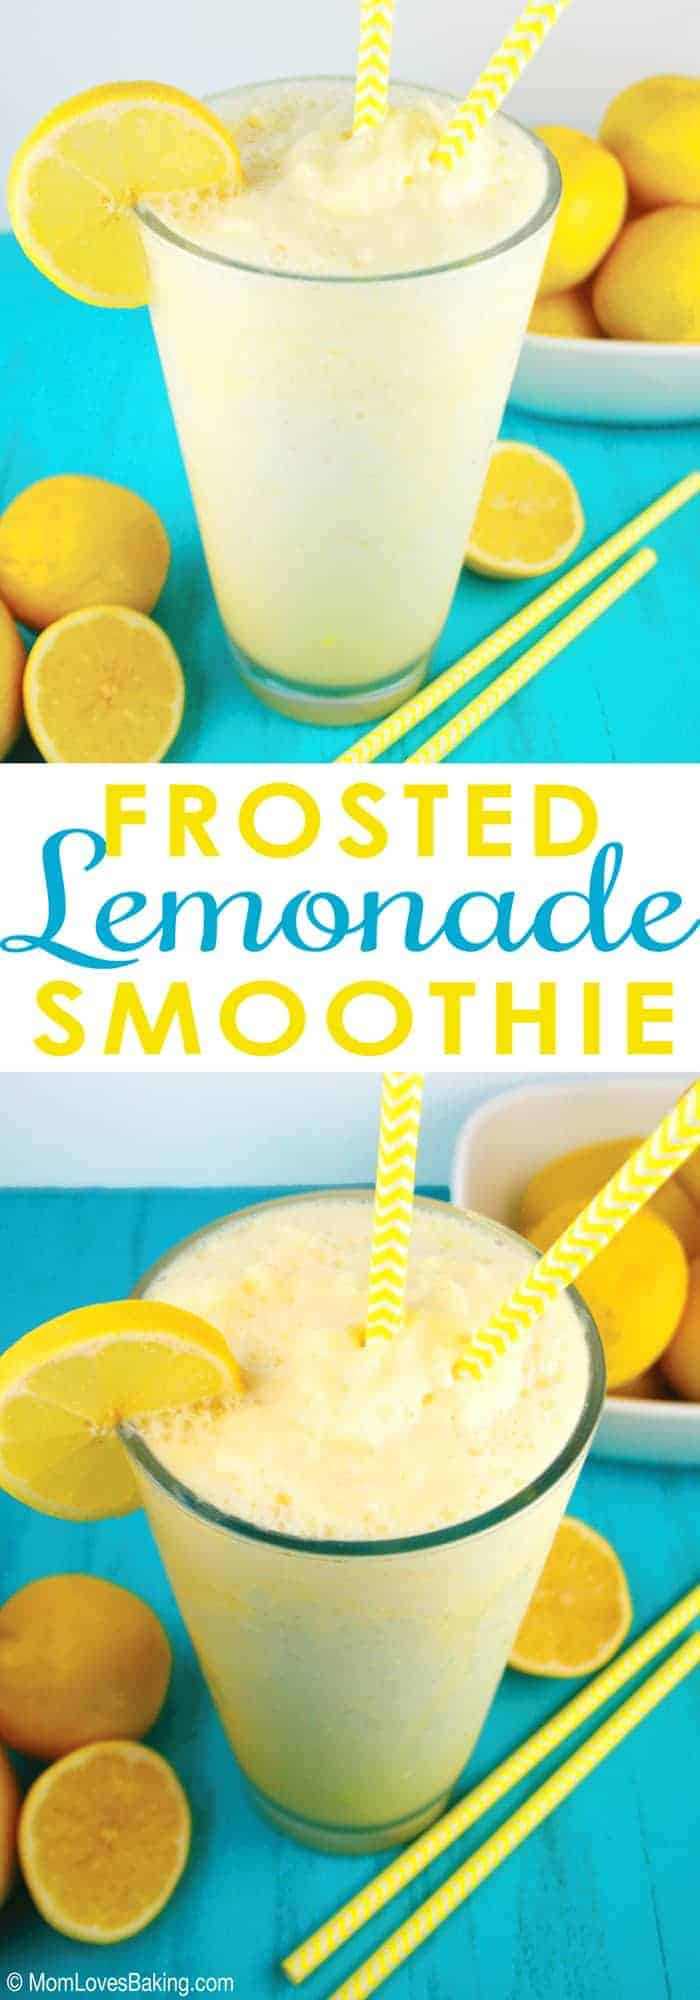 Frosted-Lemonade-Smoothie-Long